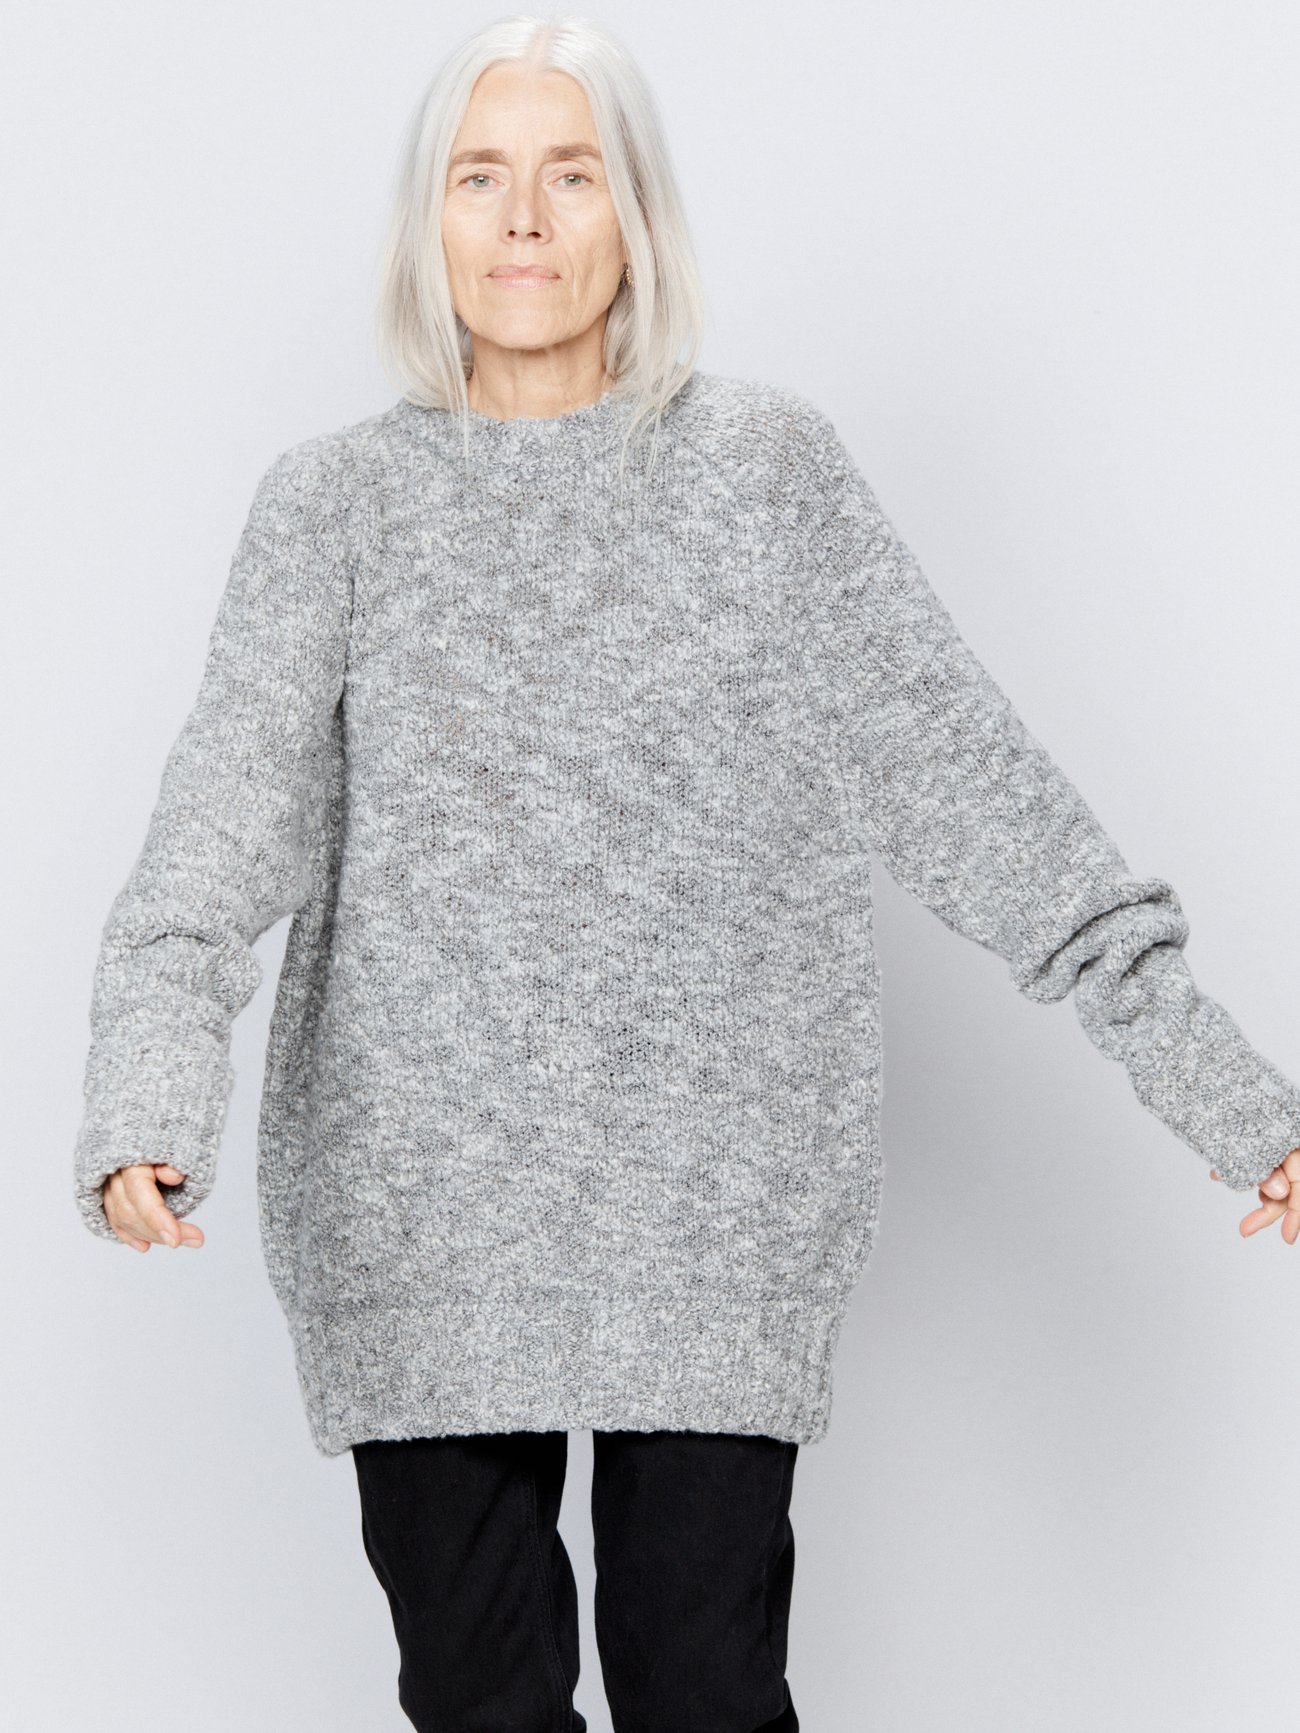 Made from a textured bouclé knit, Raey’s grey-marl sweater is designed with a classic crew neck and long raglan sleeves, hemmed by wide ribbed edges.